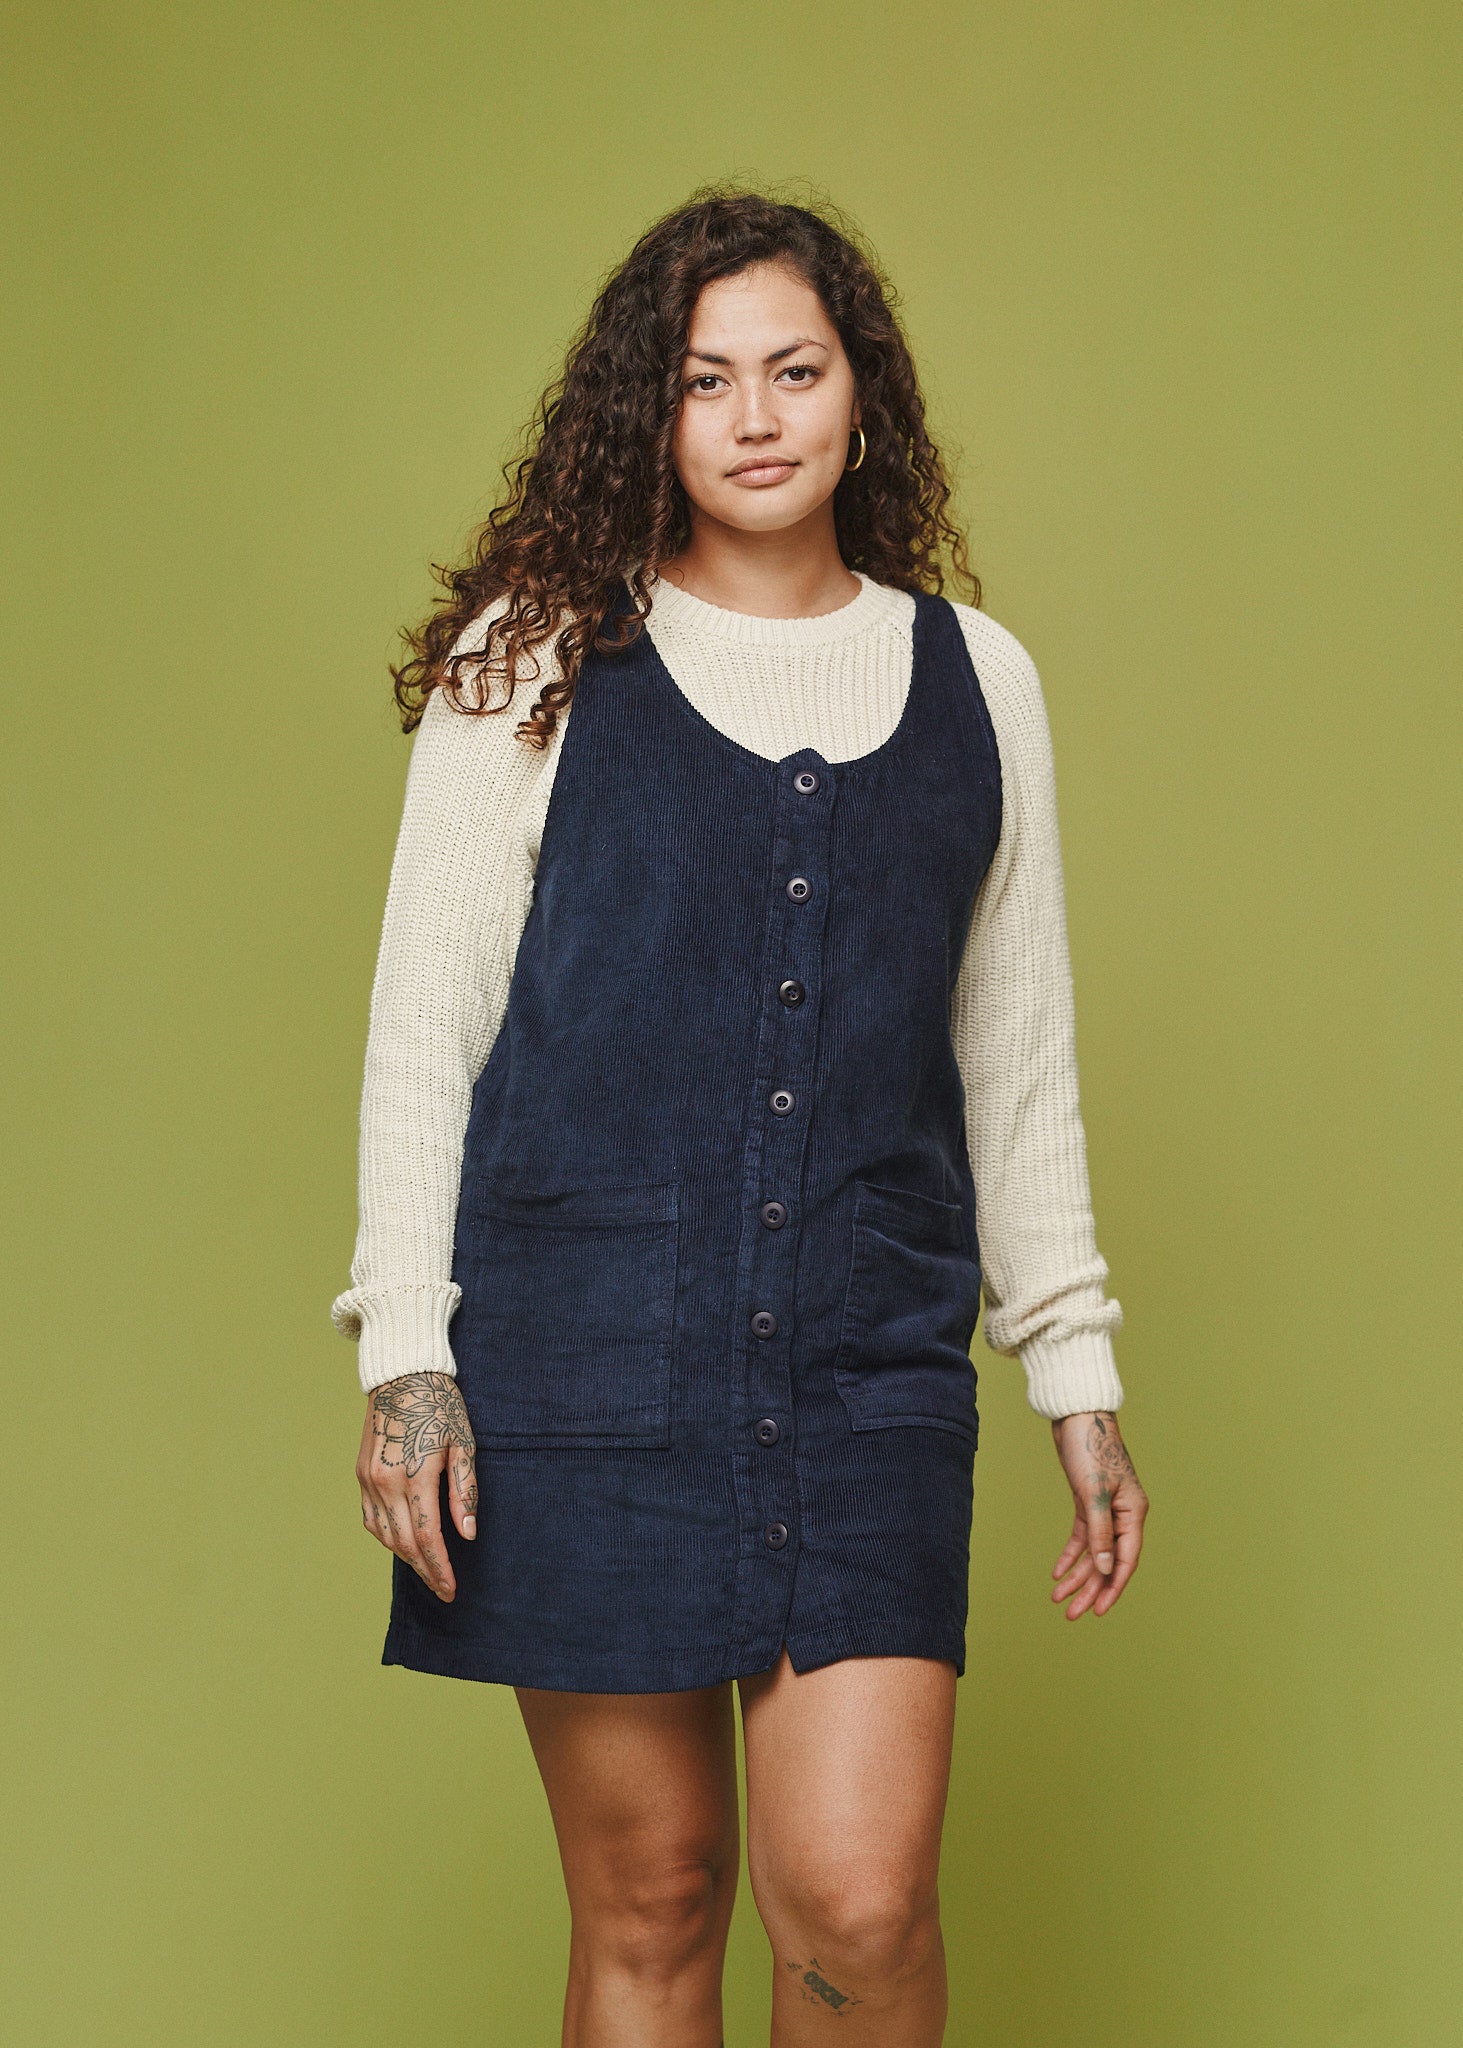 dress jumpers for women